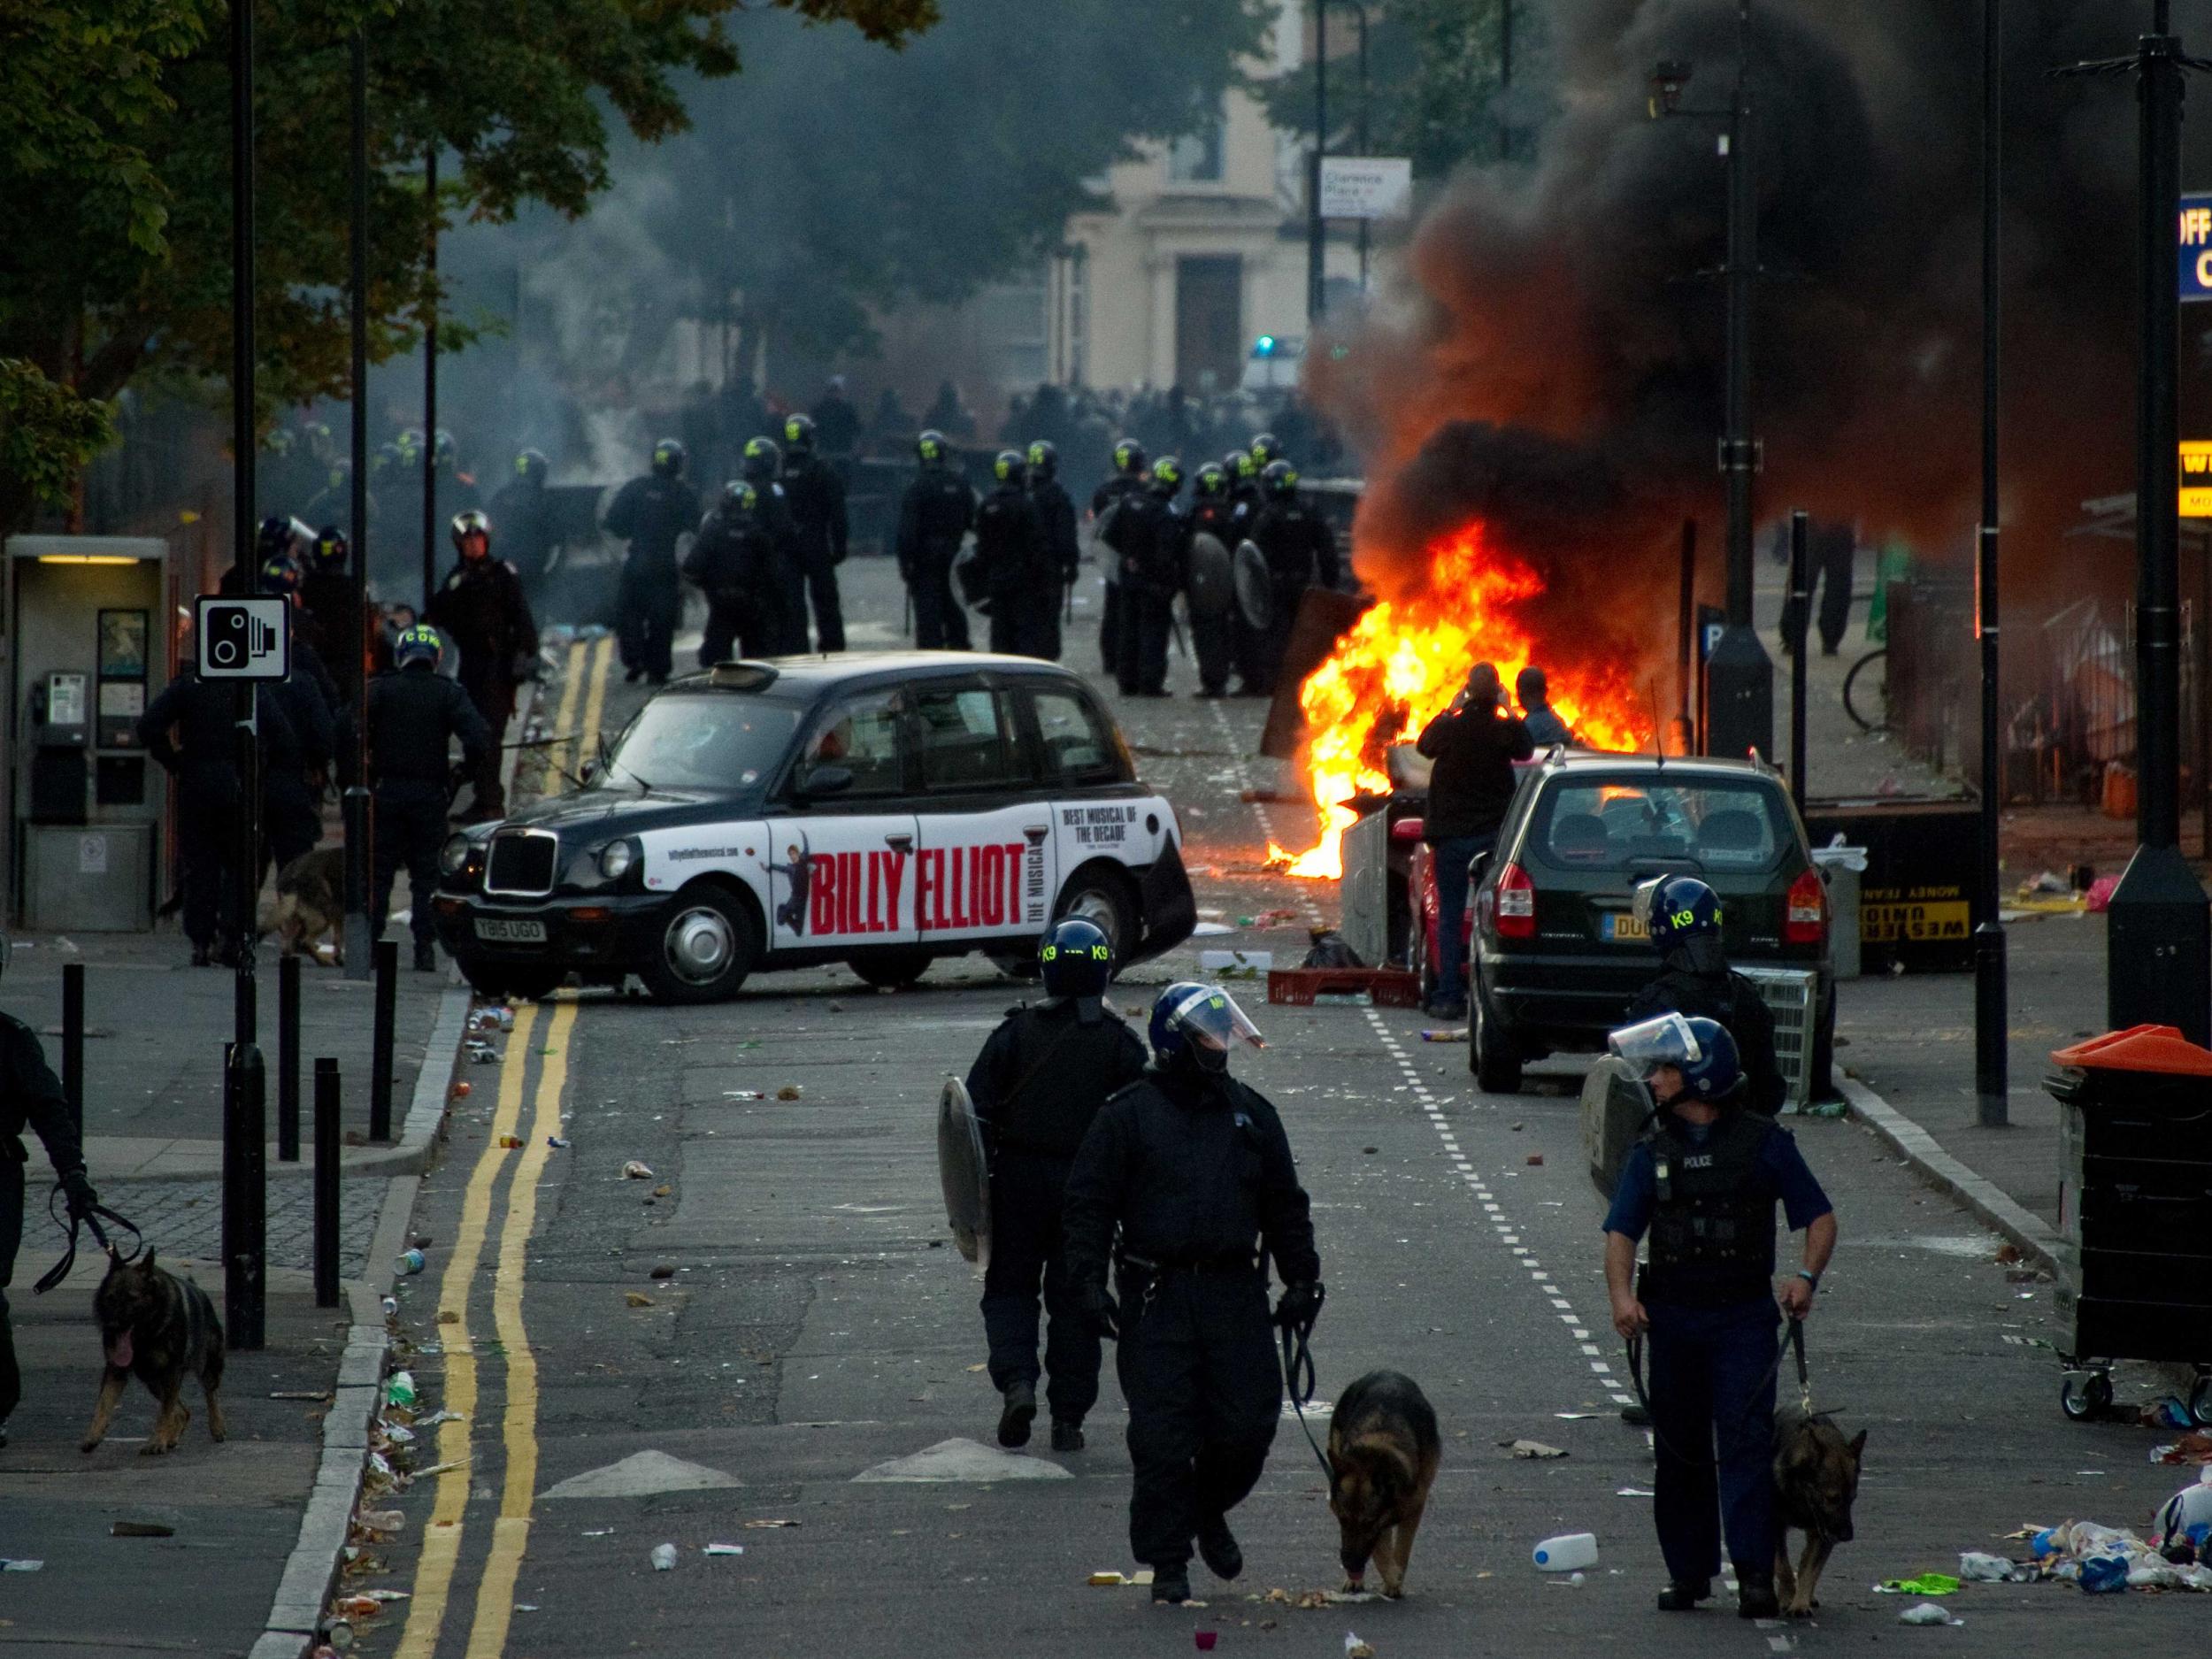 Police charge rioters in Hackney, east London, during the 2011 disturbances